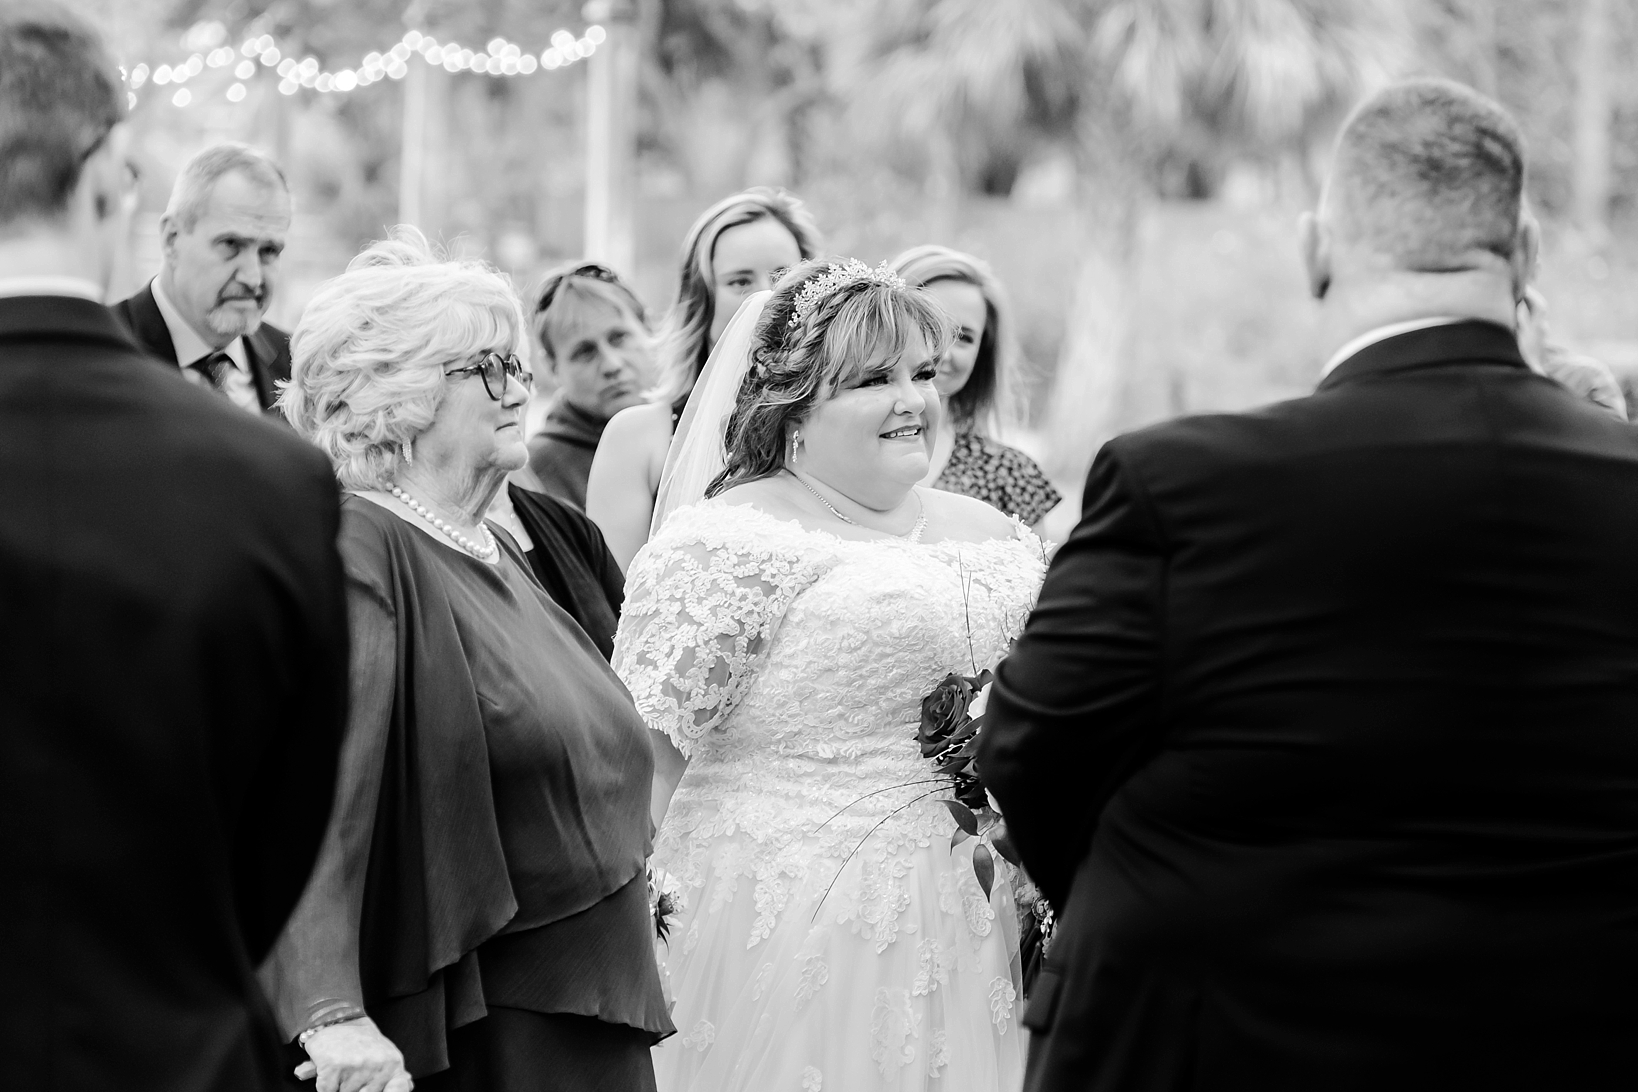 Bride looks at her groom during his vows to her during their wedding celebration